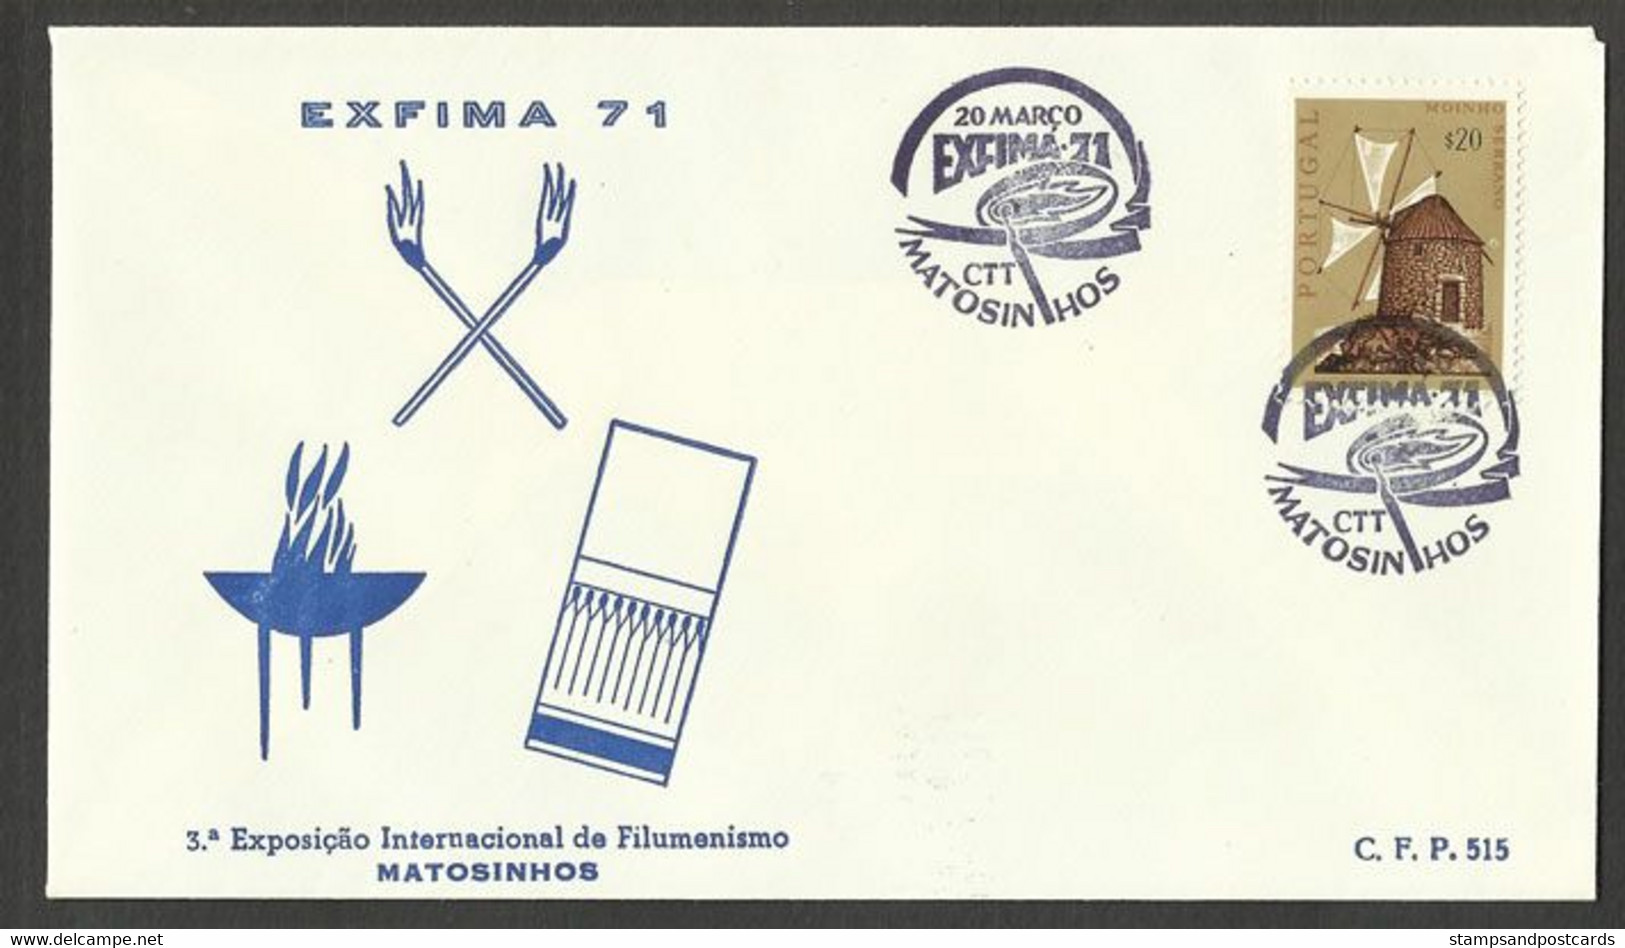 Portugal Cachet A Date Expo Collection Boîtes Allumettes 1971 Matosinhos Event Pmk Matches Matchbook Collector Expo - Postal Logo & Postmarks